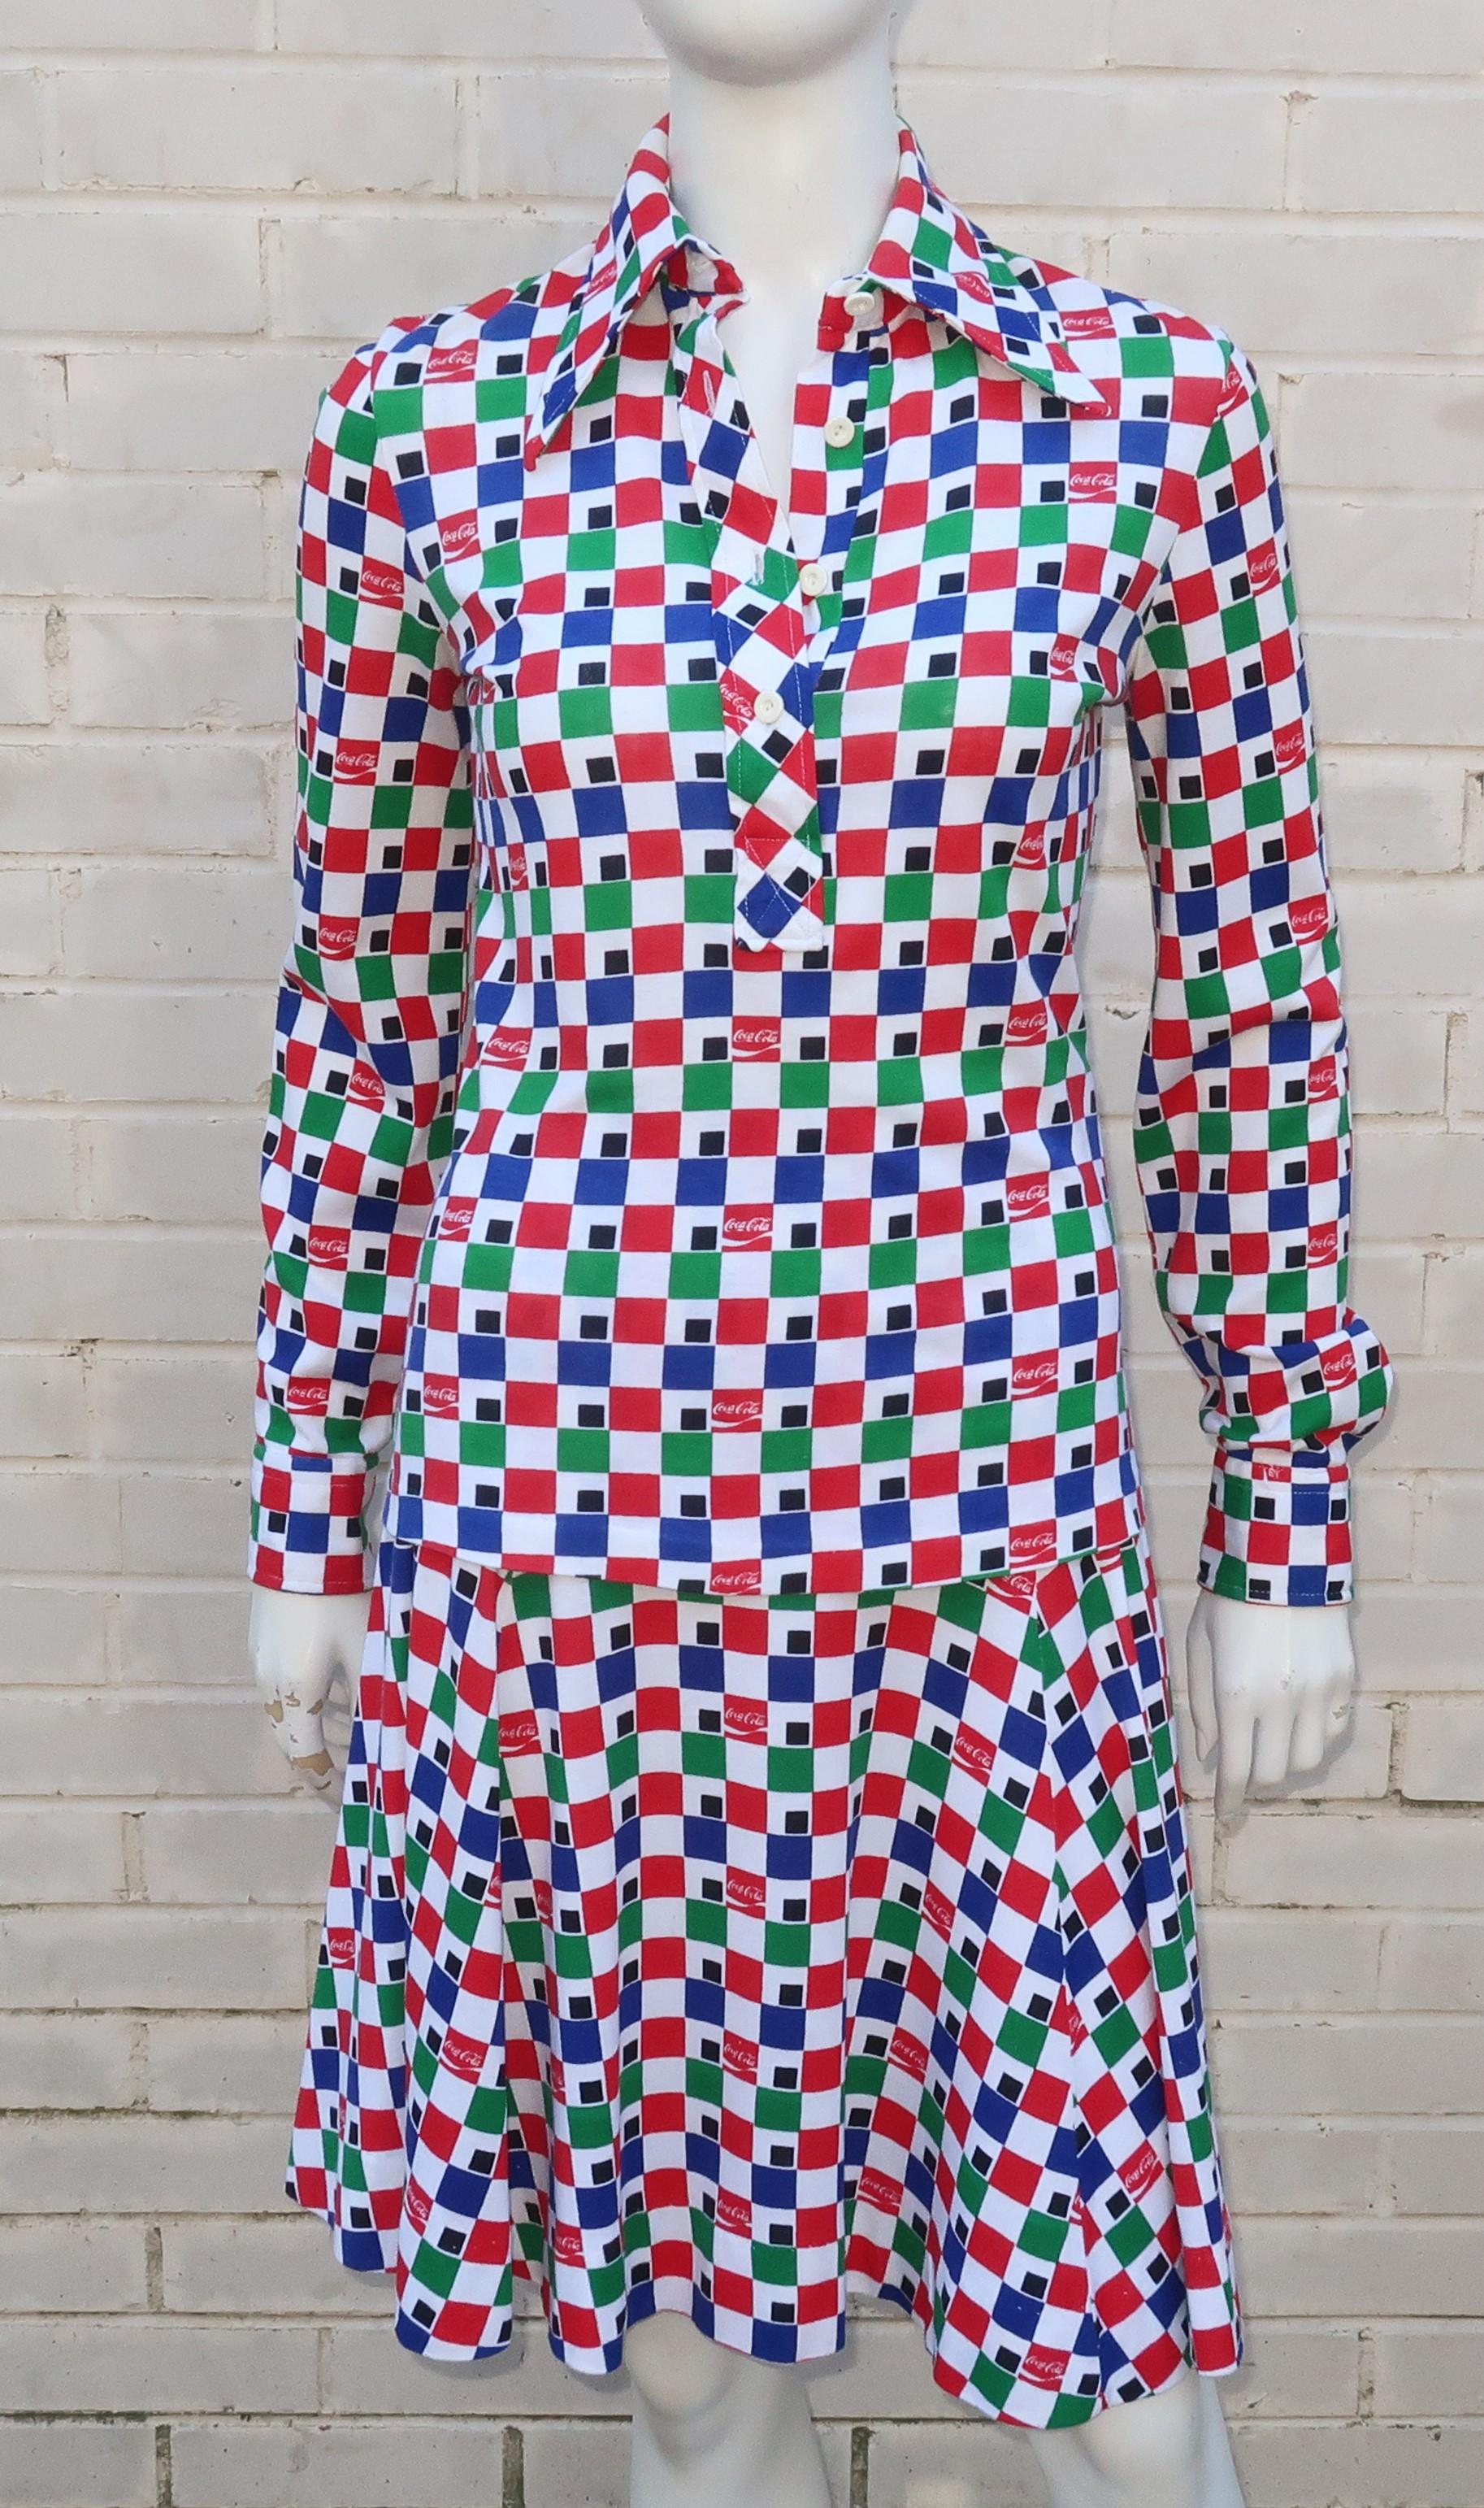 A fun 1970's two piece jersey dress in a vibrant combination of red, green, blue, white and black check pattern with a surprise 'Coca-Cola' logo designed into the print.  Made in Italy by Eva for Robert Janan and similar in weight and style to the